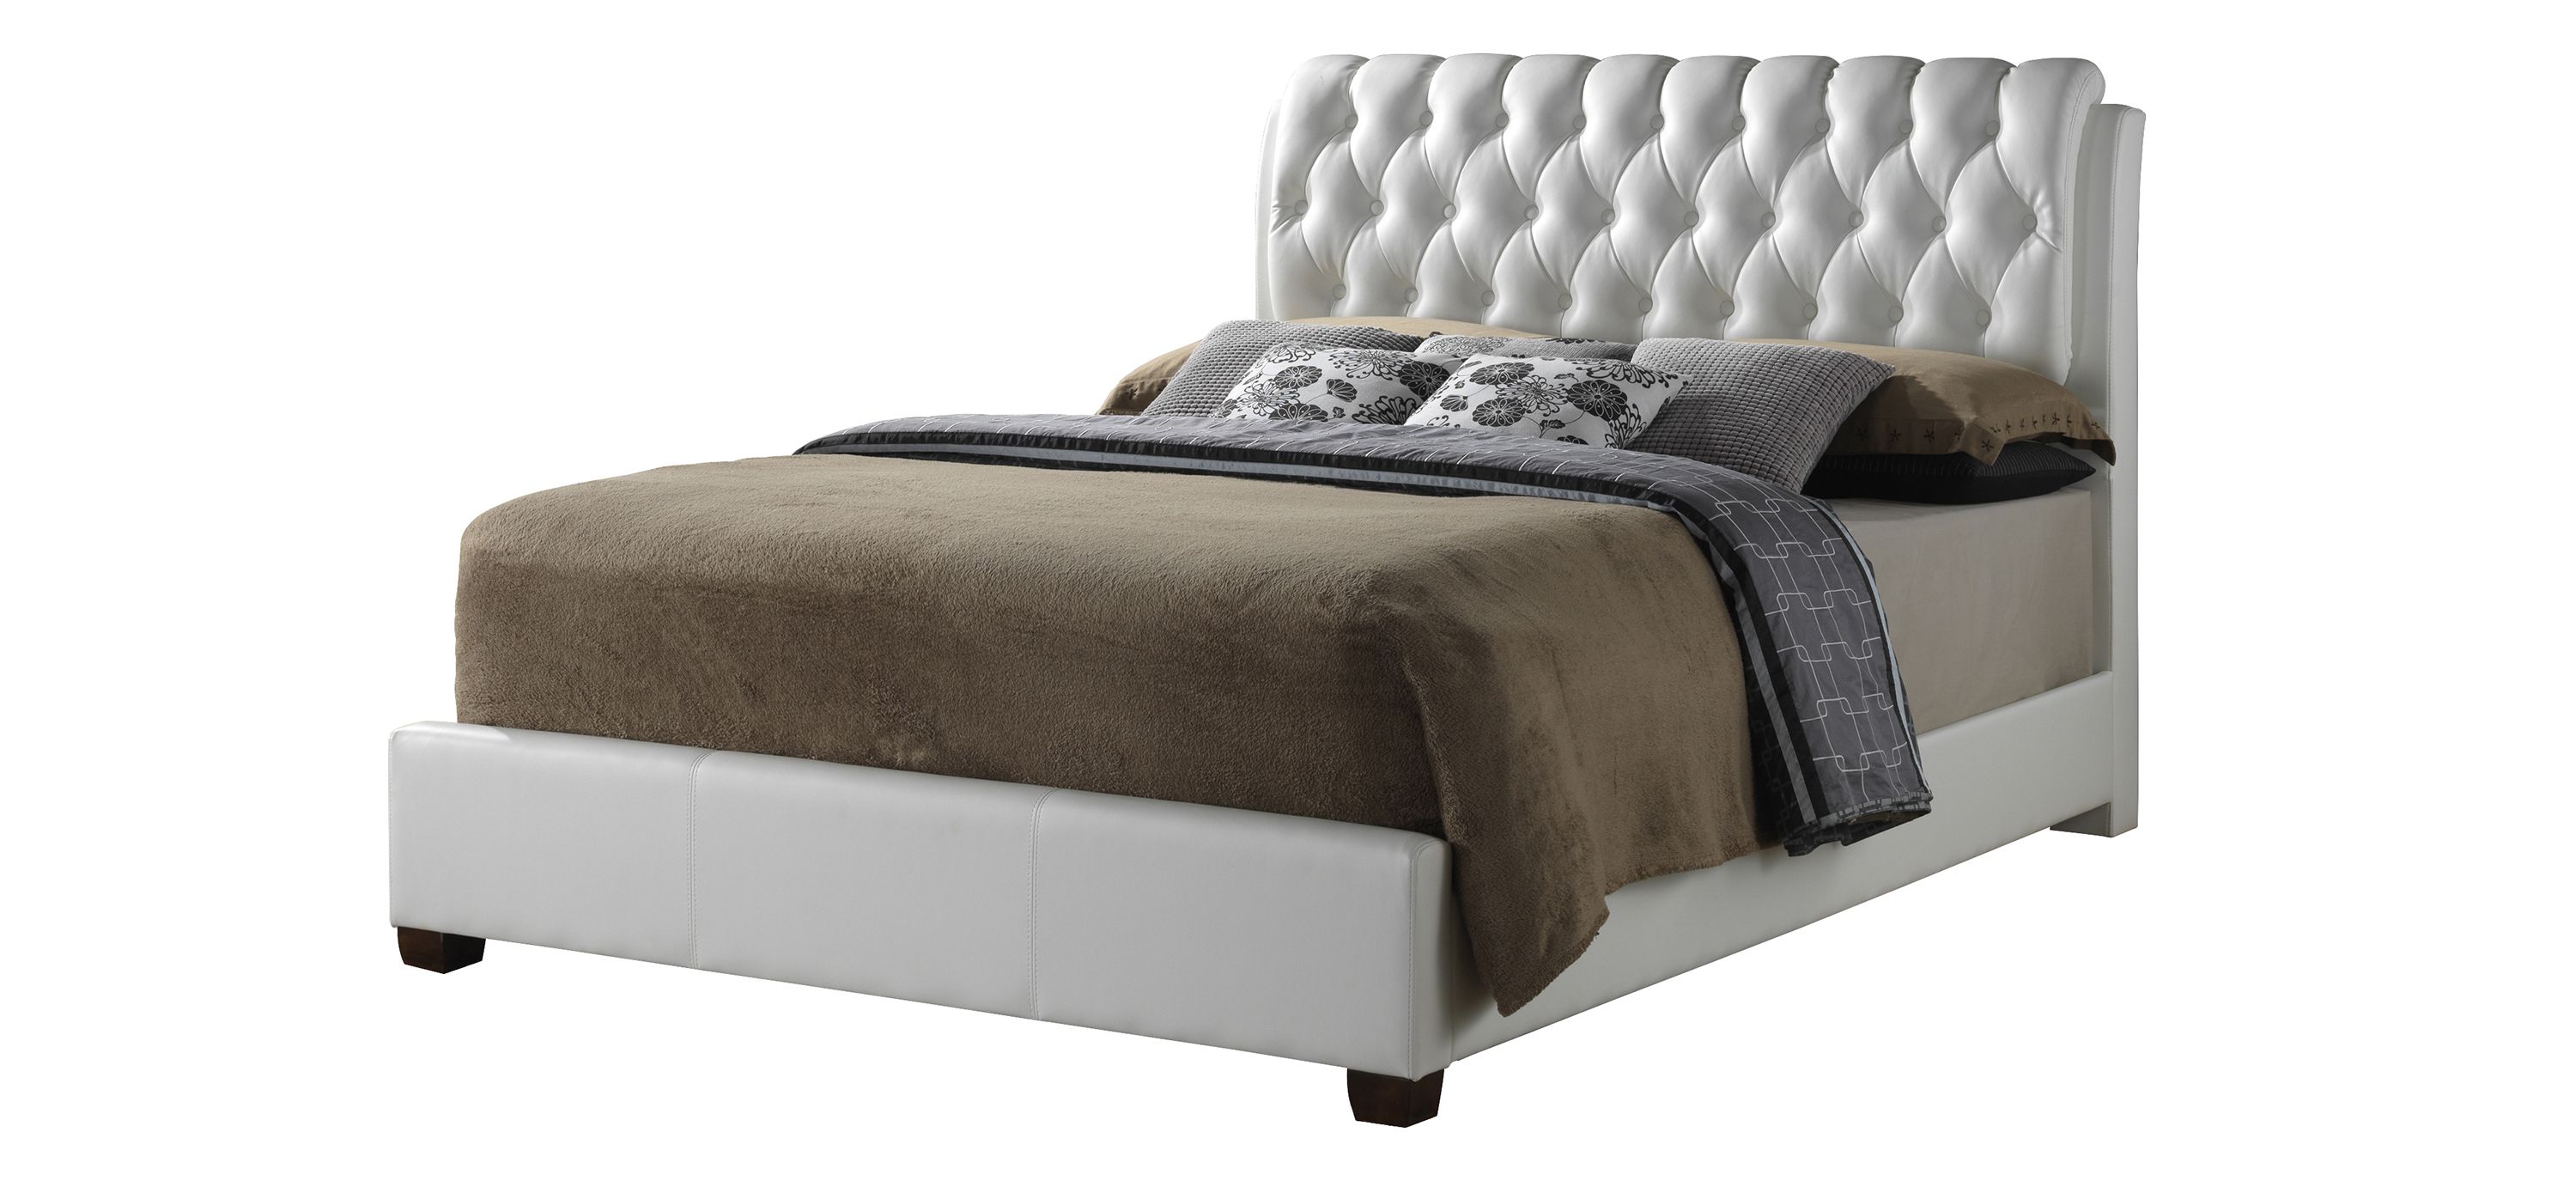 Marilla Upholstered Bed